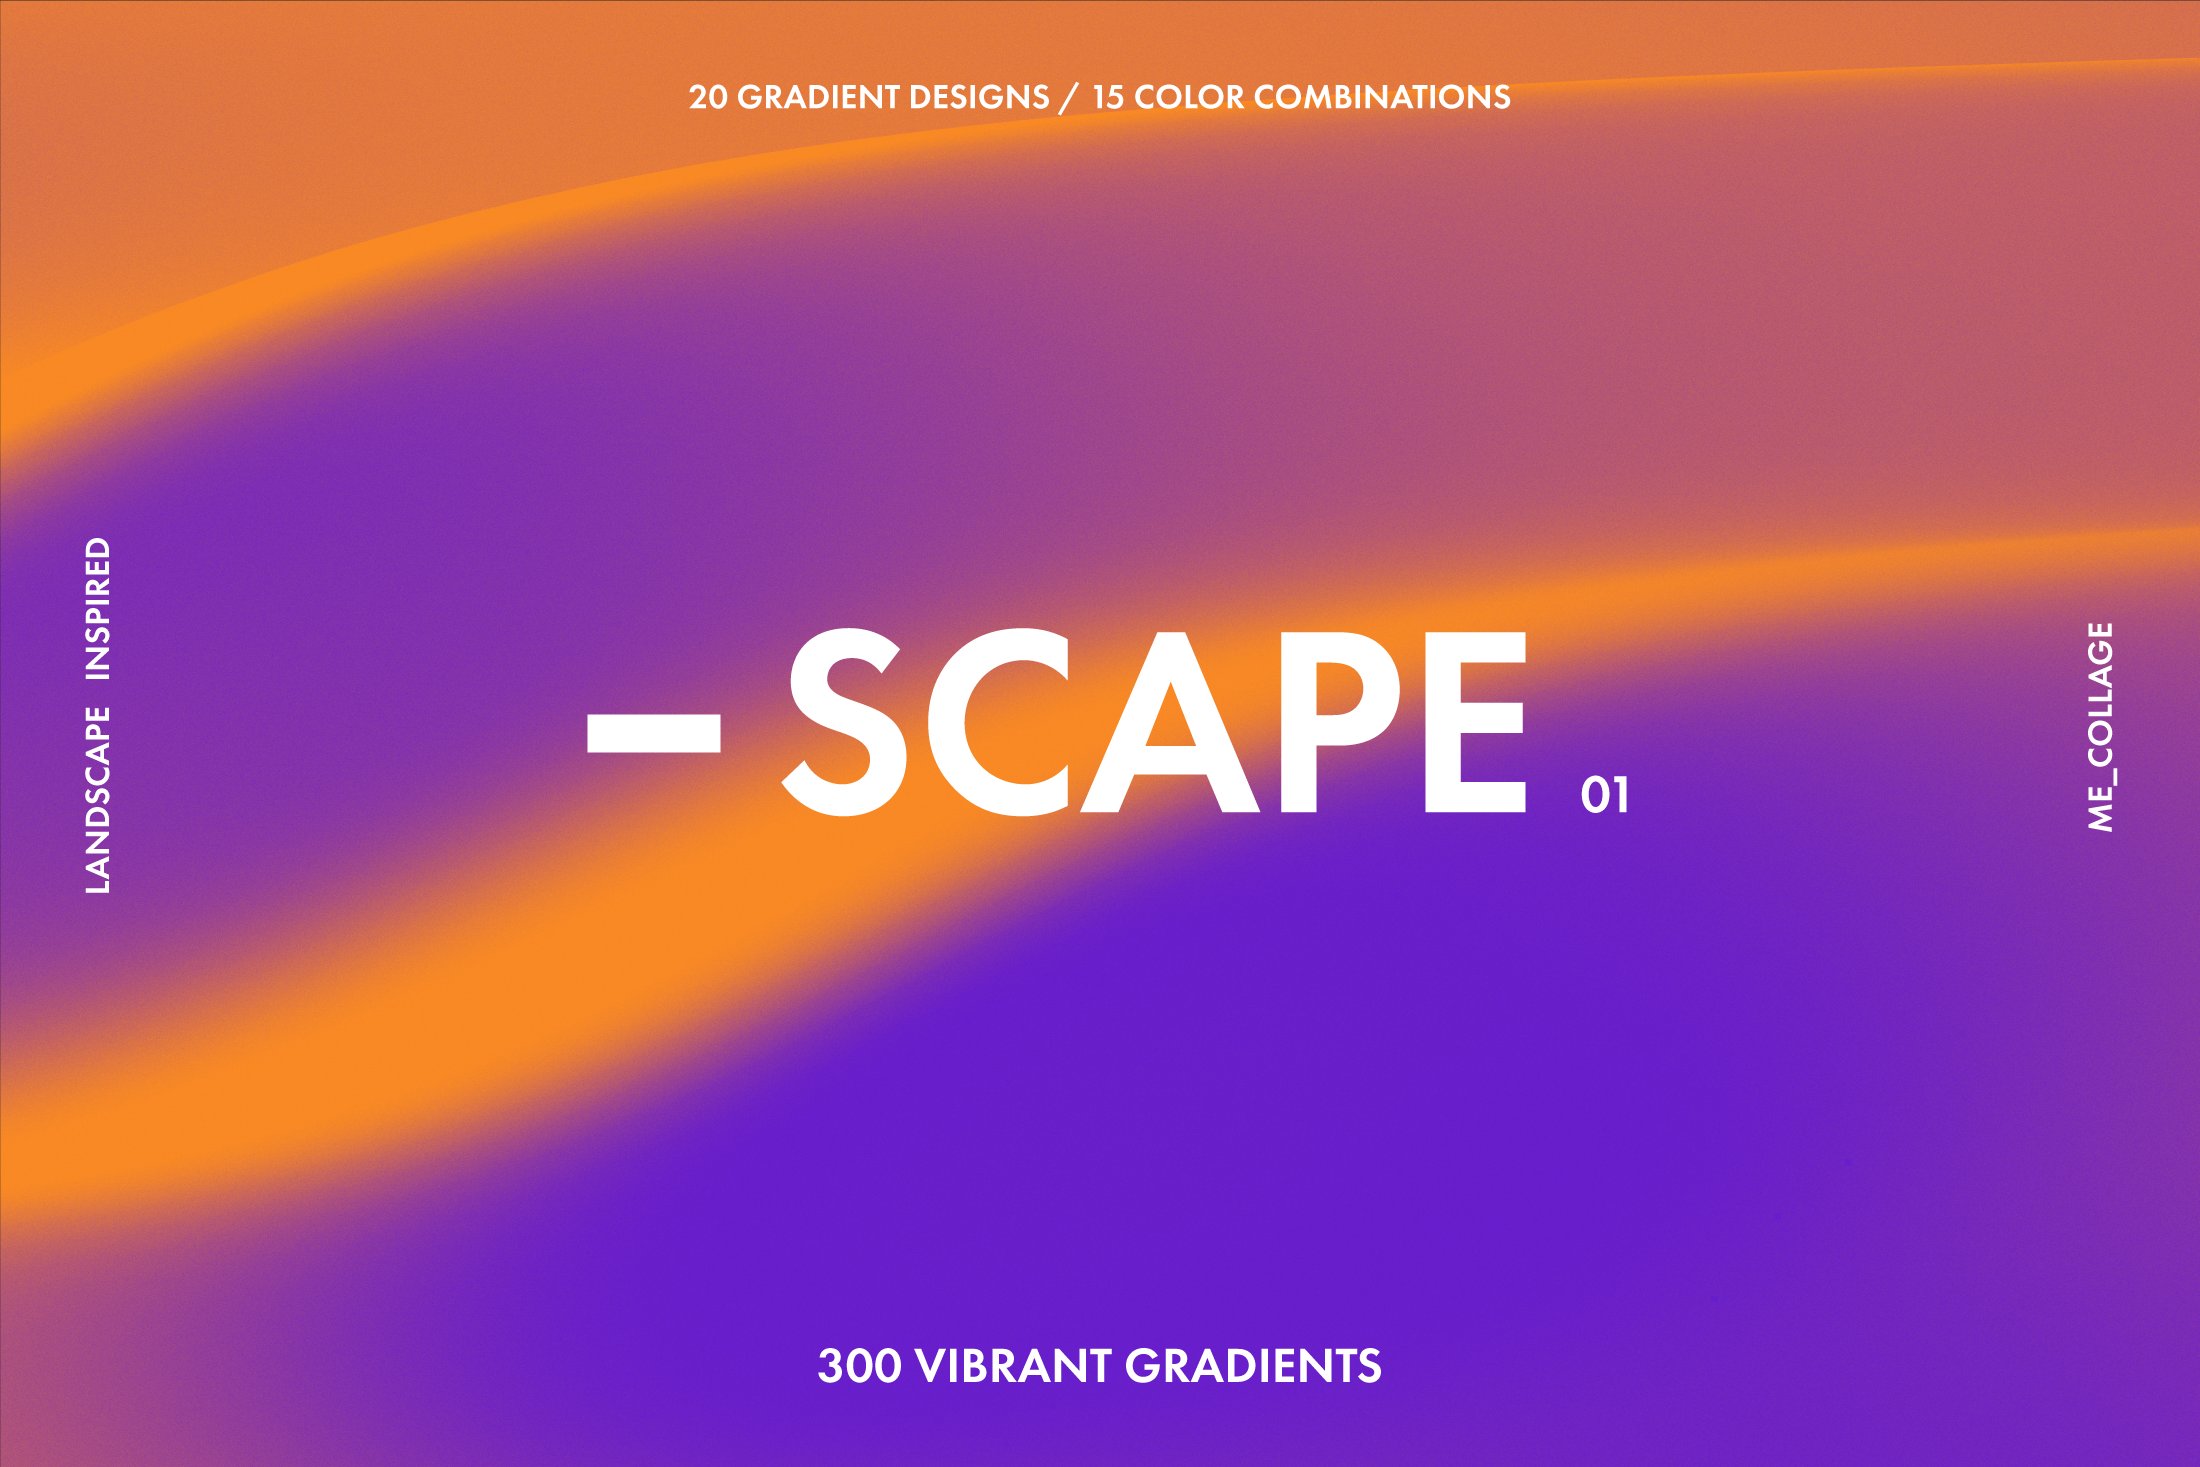 VIBRANT ABSTRACT GRADIENT TEXTURES cover image.